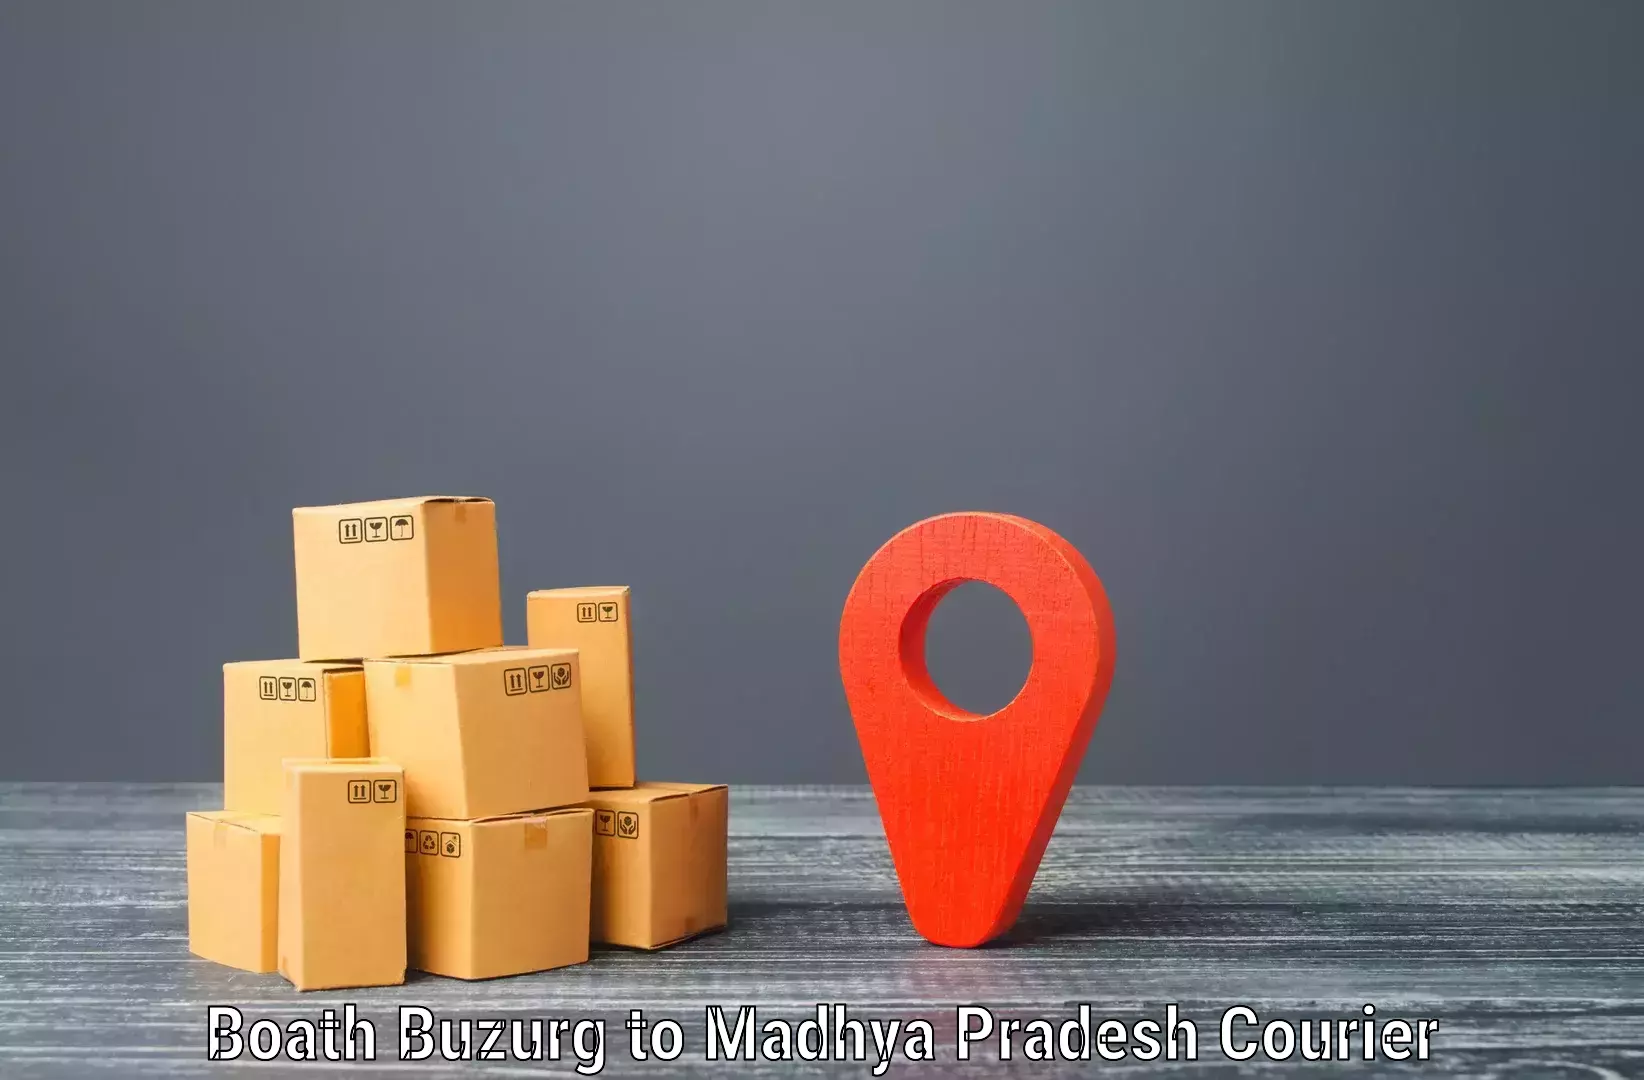 Global courier networks Boath Buzurg to Mandideep